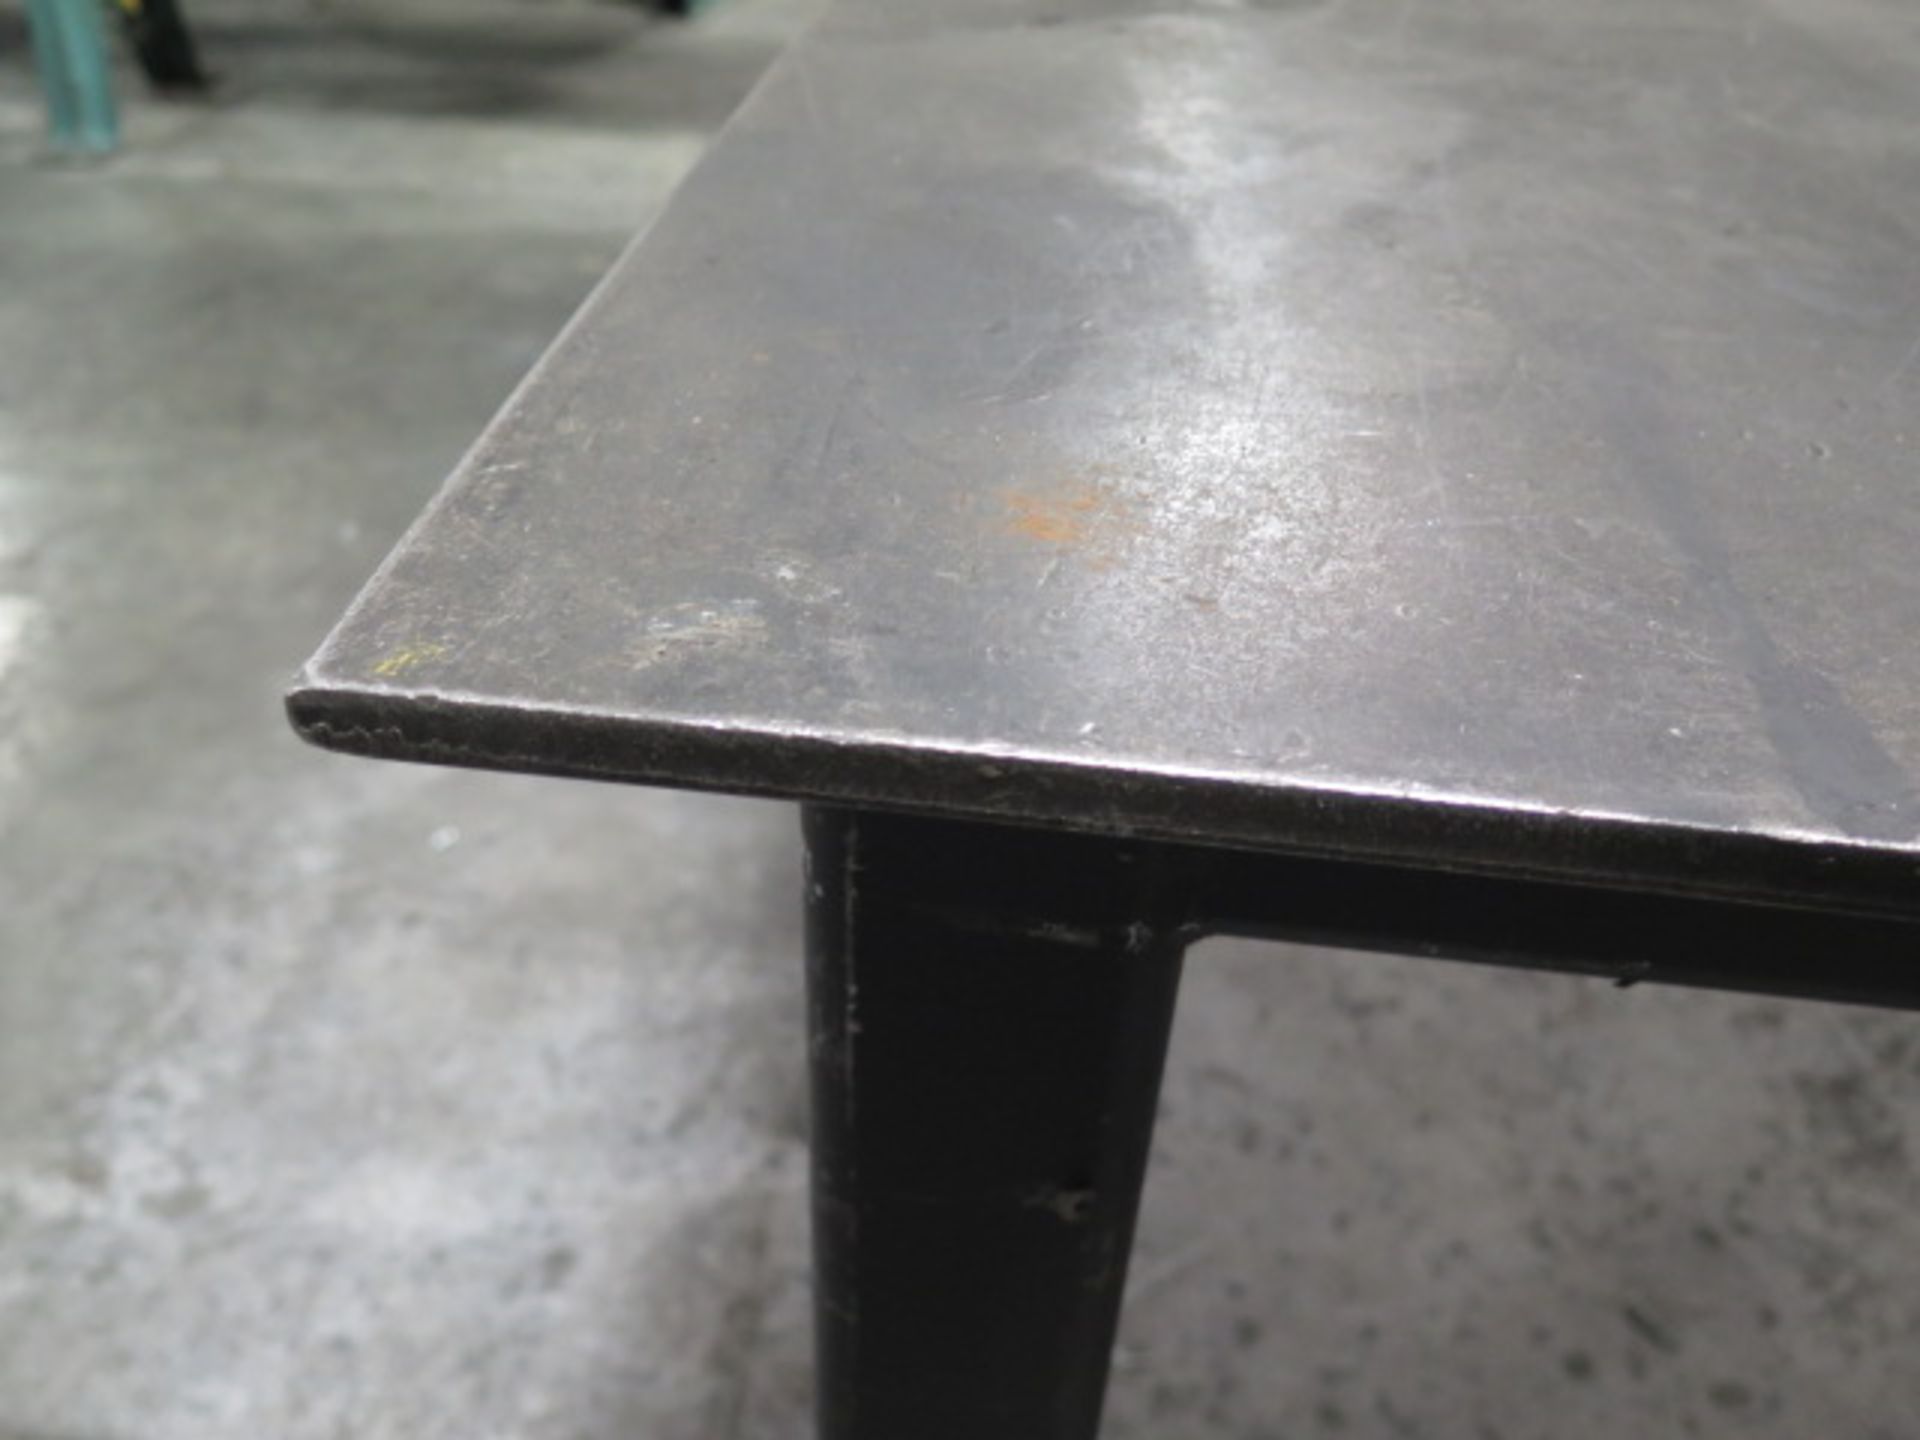 48" x 48" Steel Table w/ 3" Forming Bar (SOLD AS-IS - NO WARRANTY) - Image 3 of 3